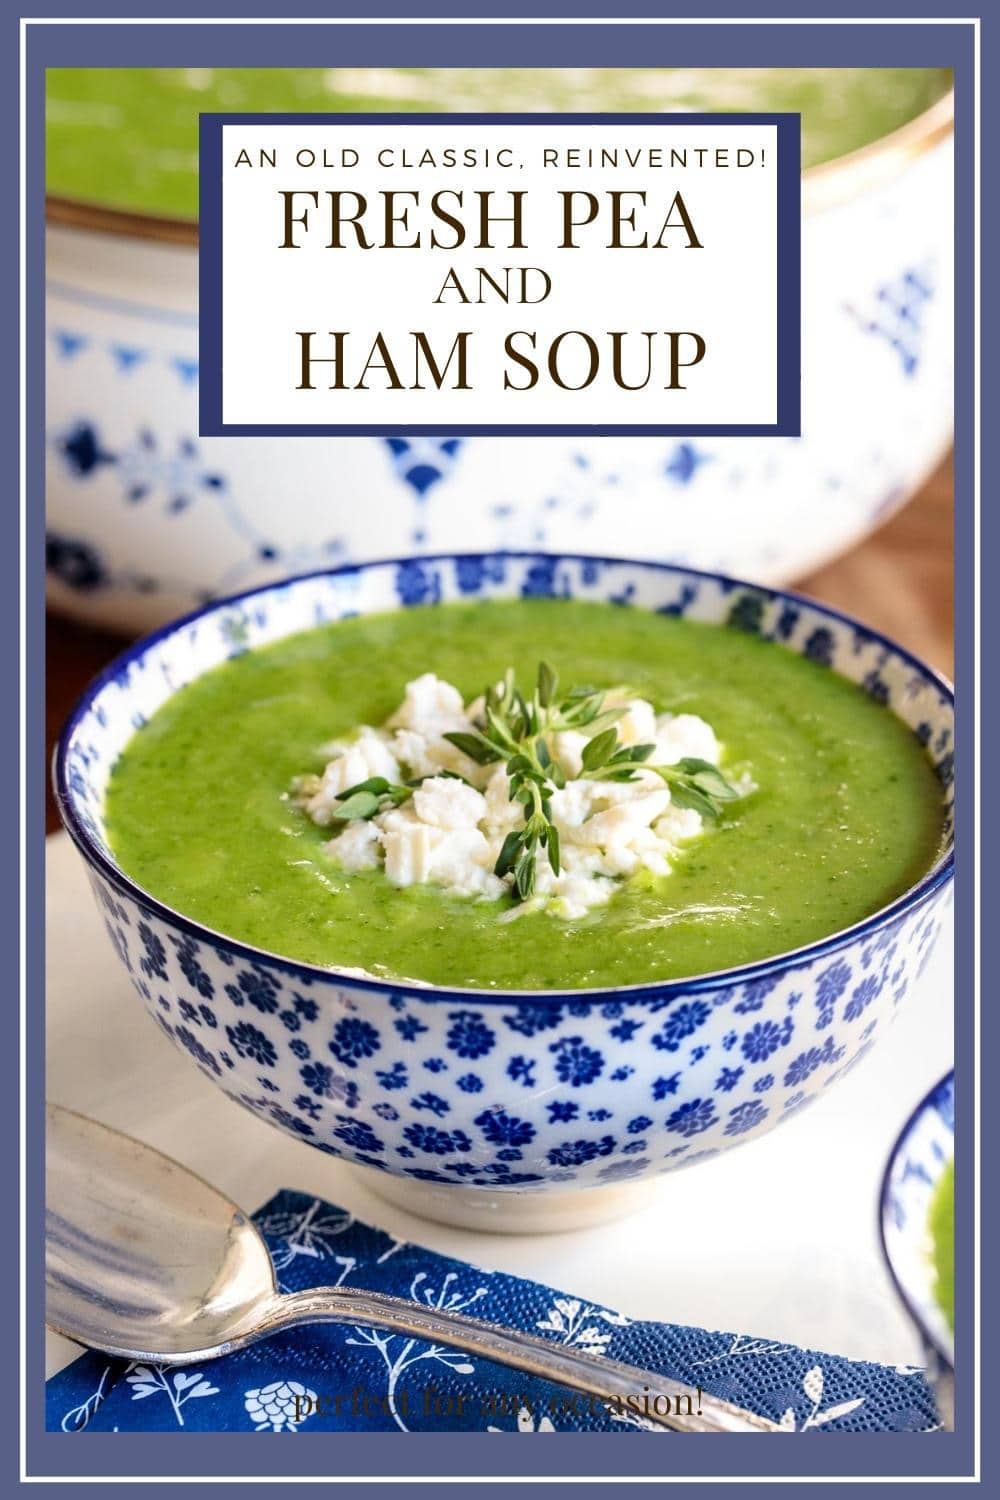 Ham and Fresh Pea Soup - A delicious new take on an old classic!